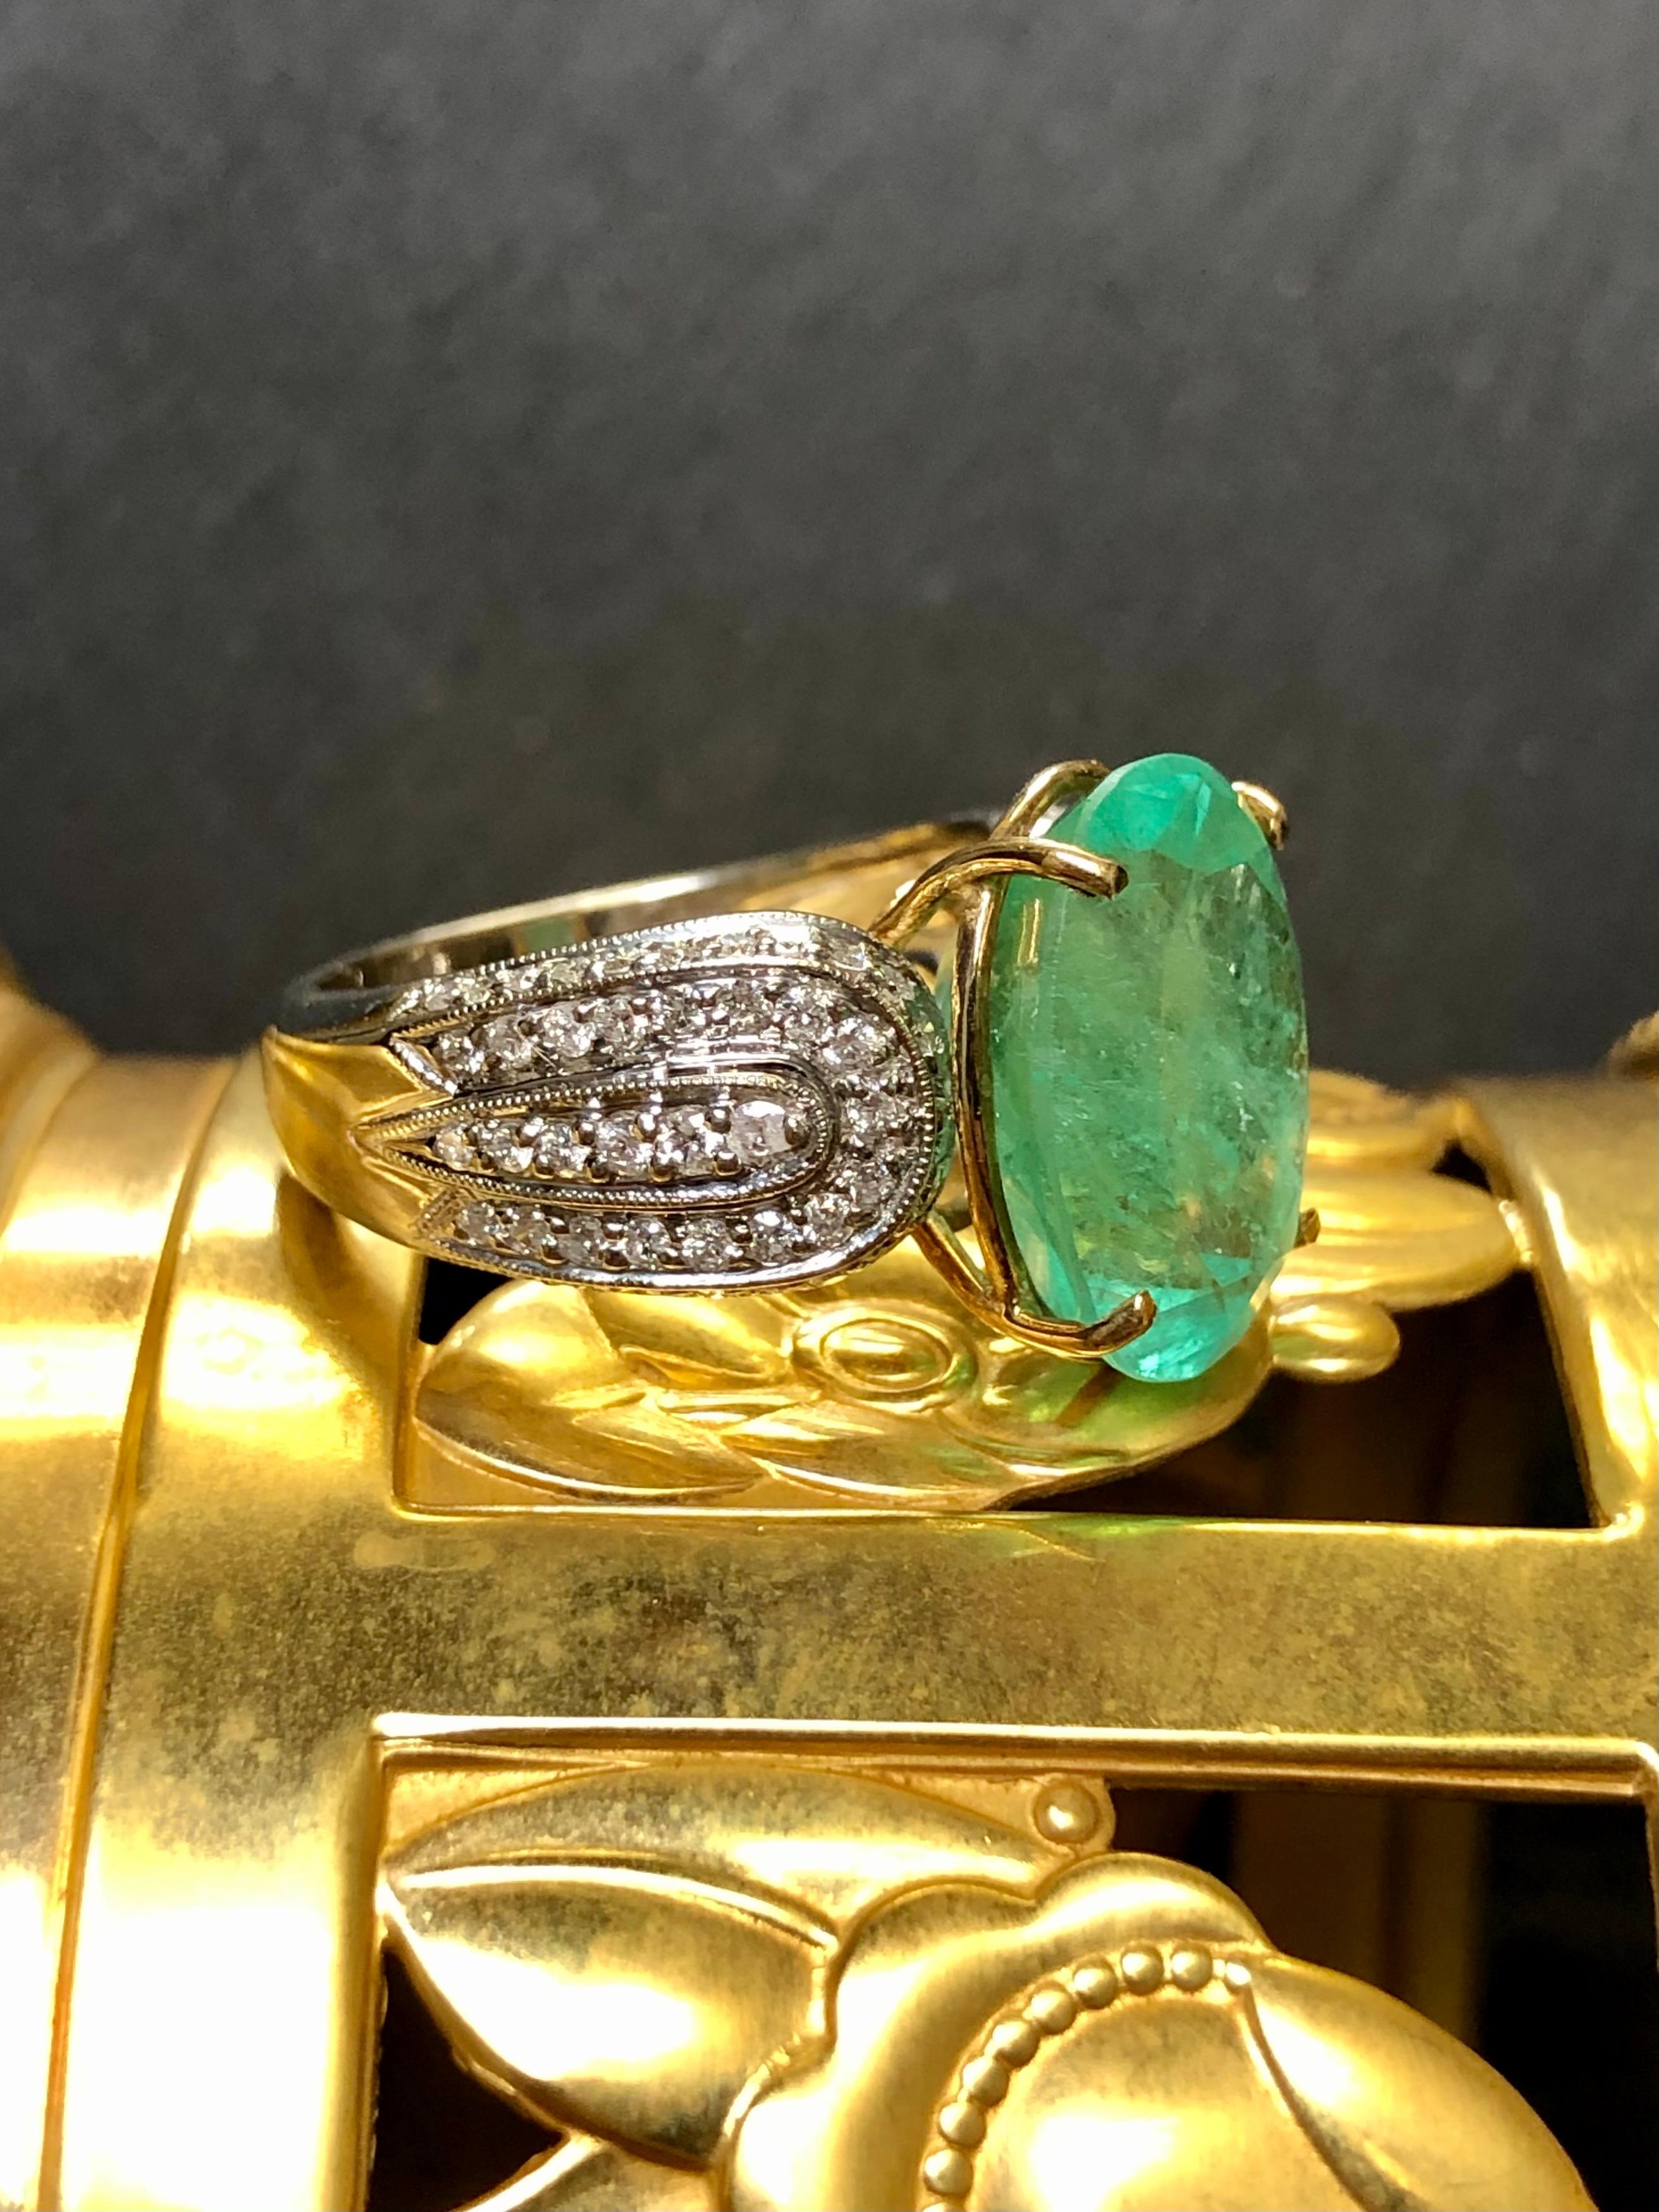 Contemporary Estate 14K LARGE Oval Emerald Diamond Cocktail Ring Sz 7.25 9.24cttw For Sale